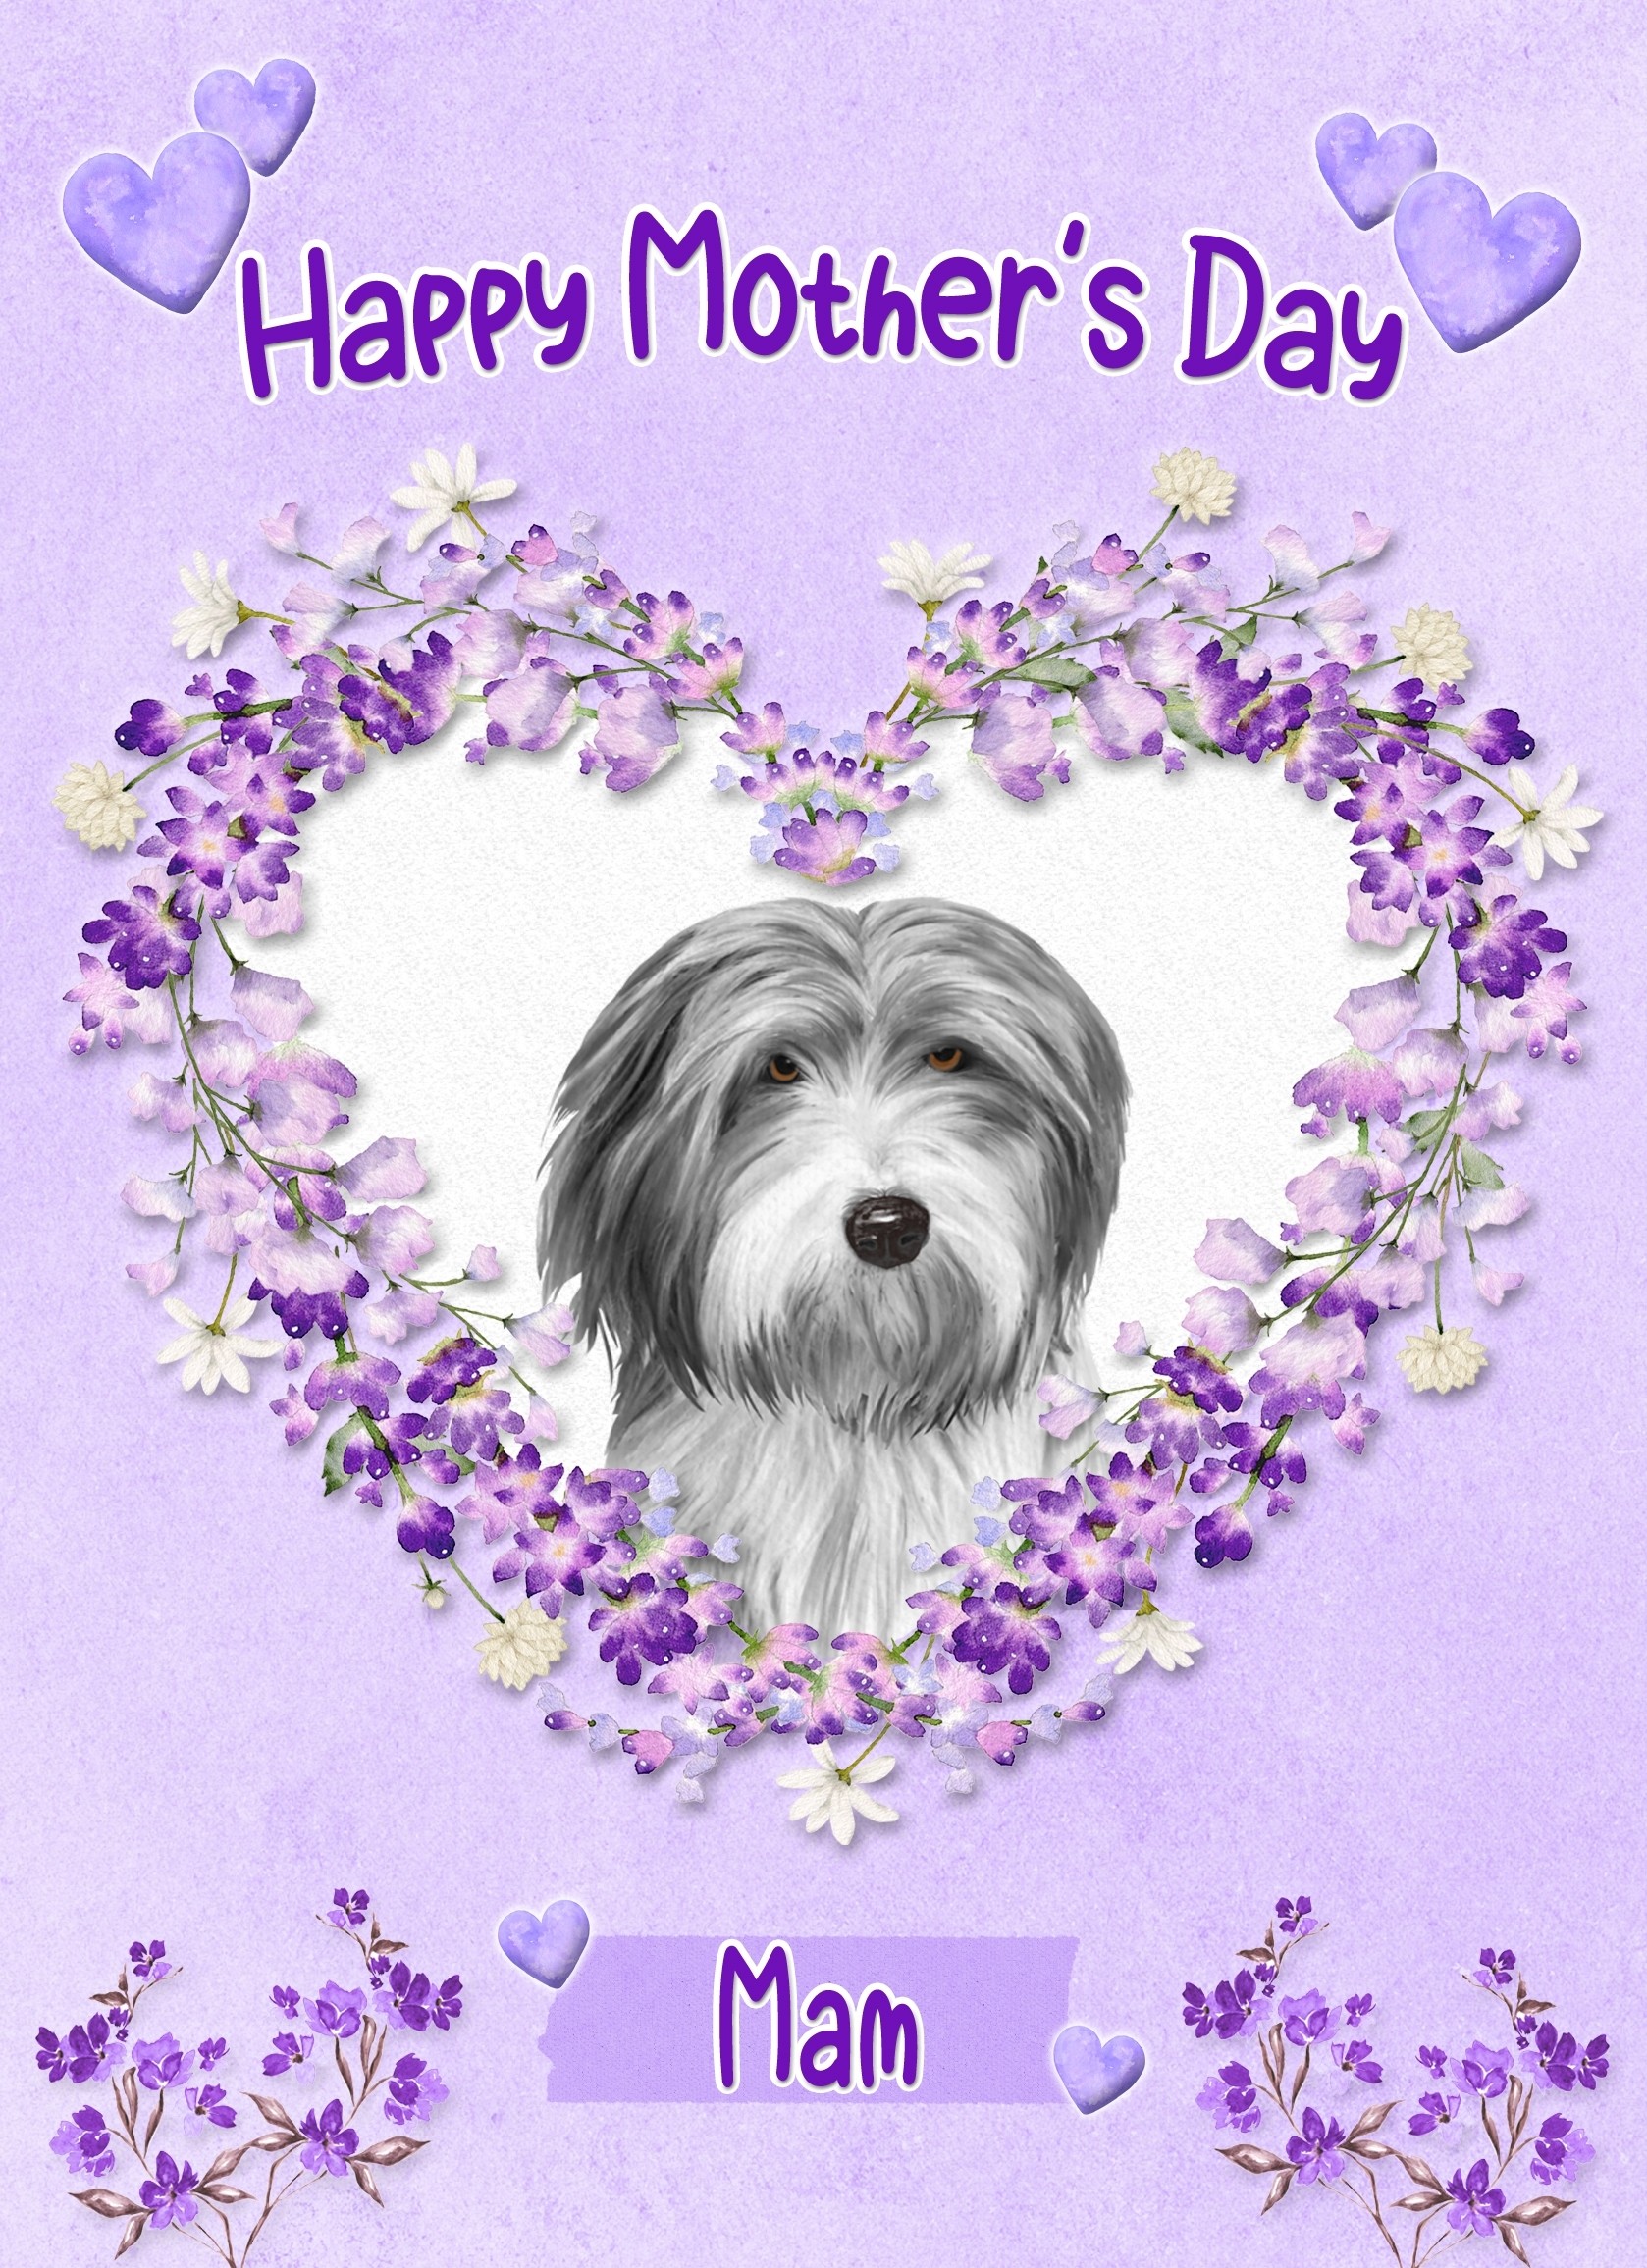 Bearded Collie Dog Mothers Day Card (Happy Mothers, Mam)